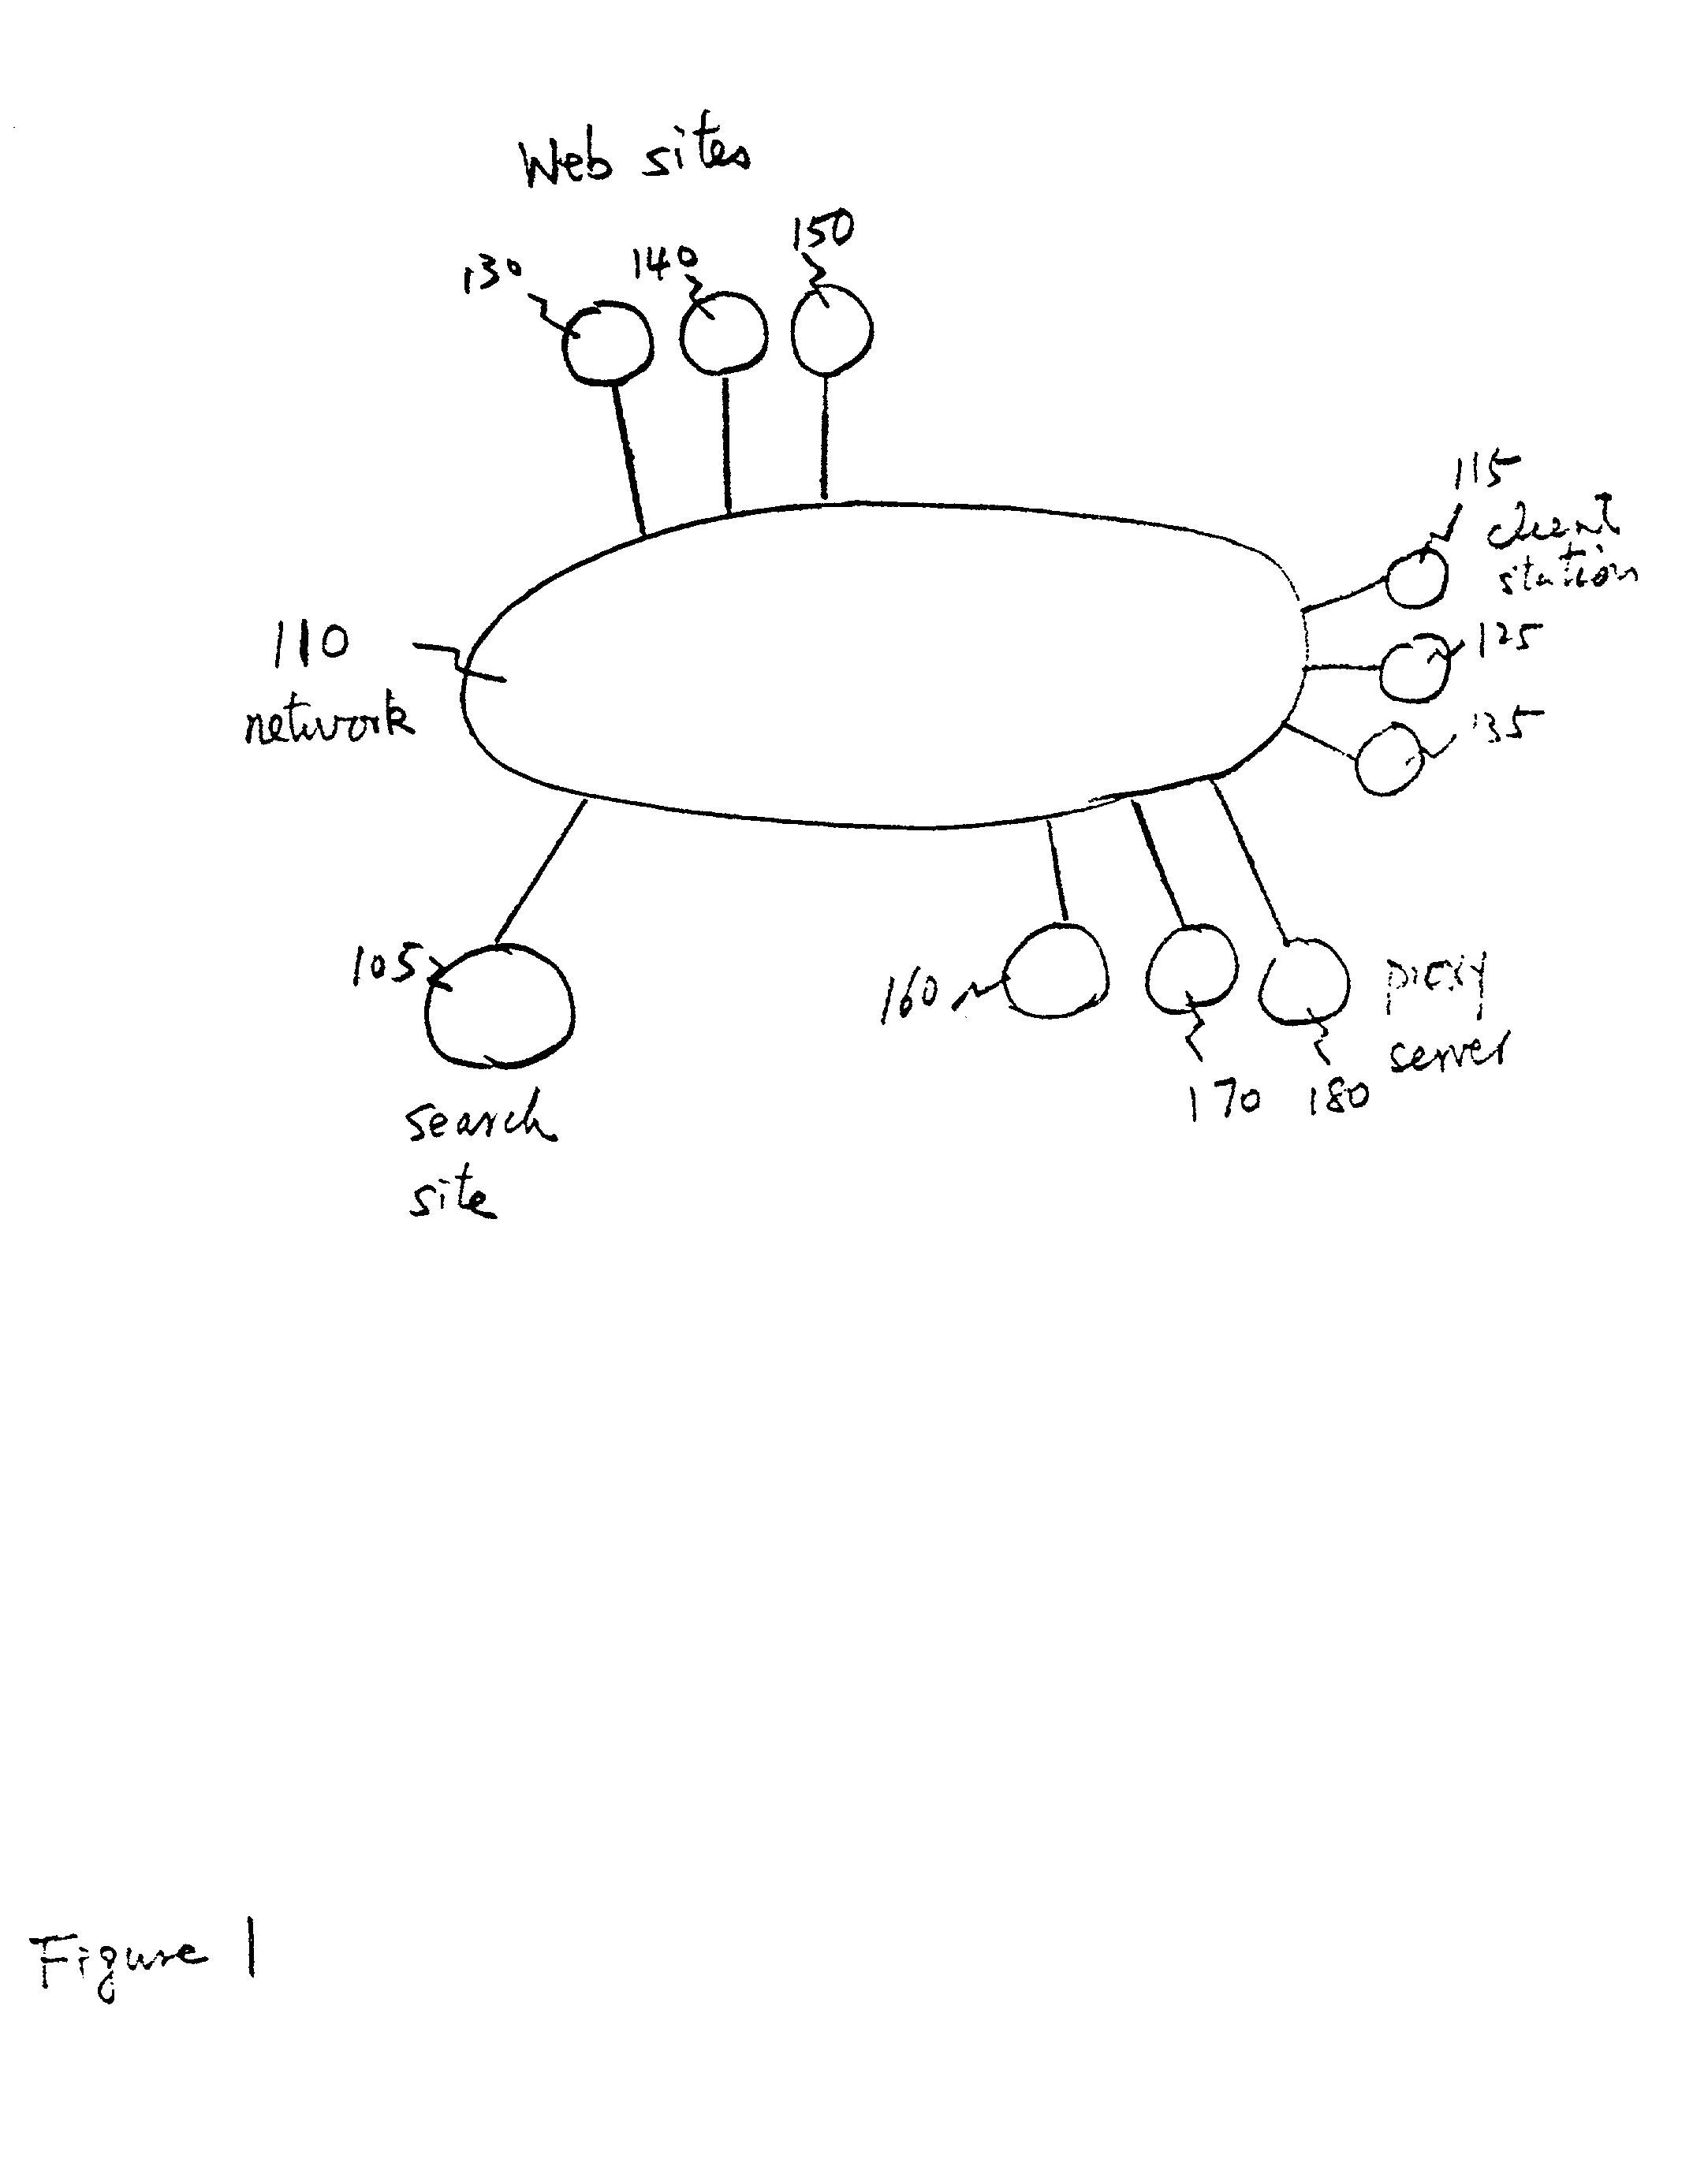 System and method for providing service for searching web site addresses